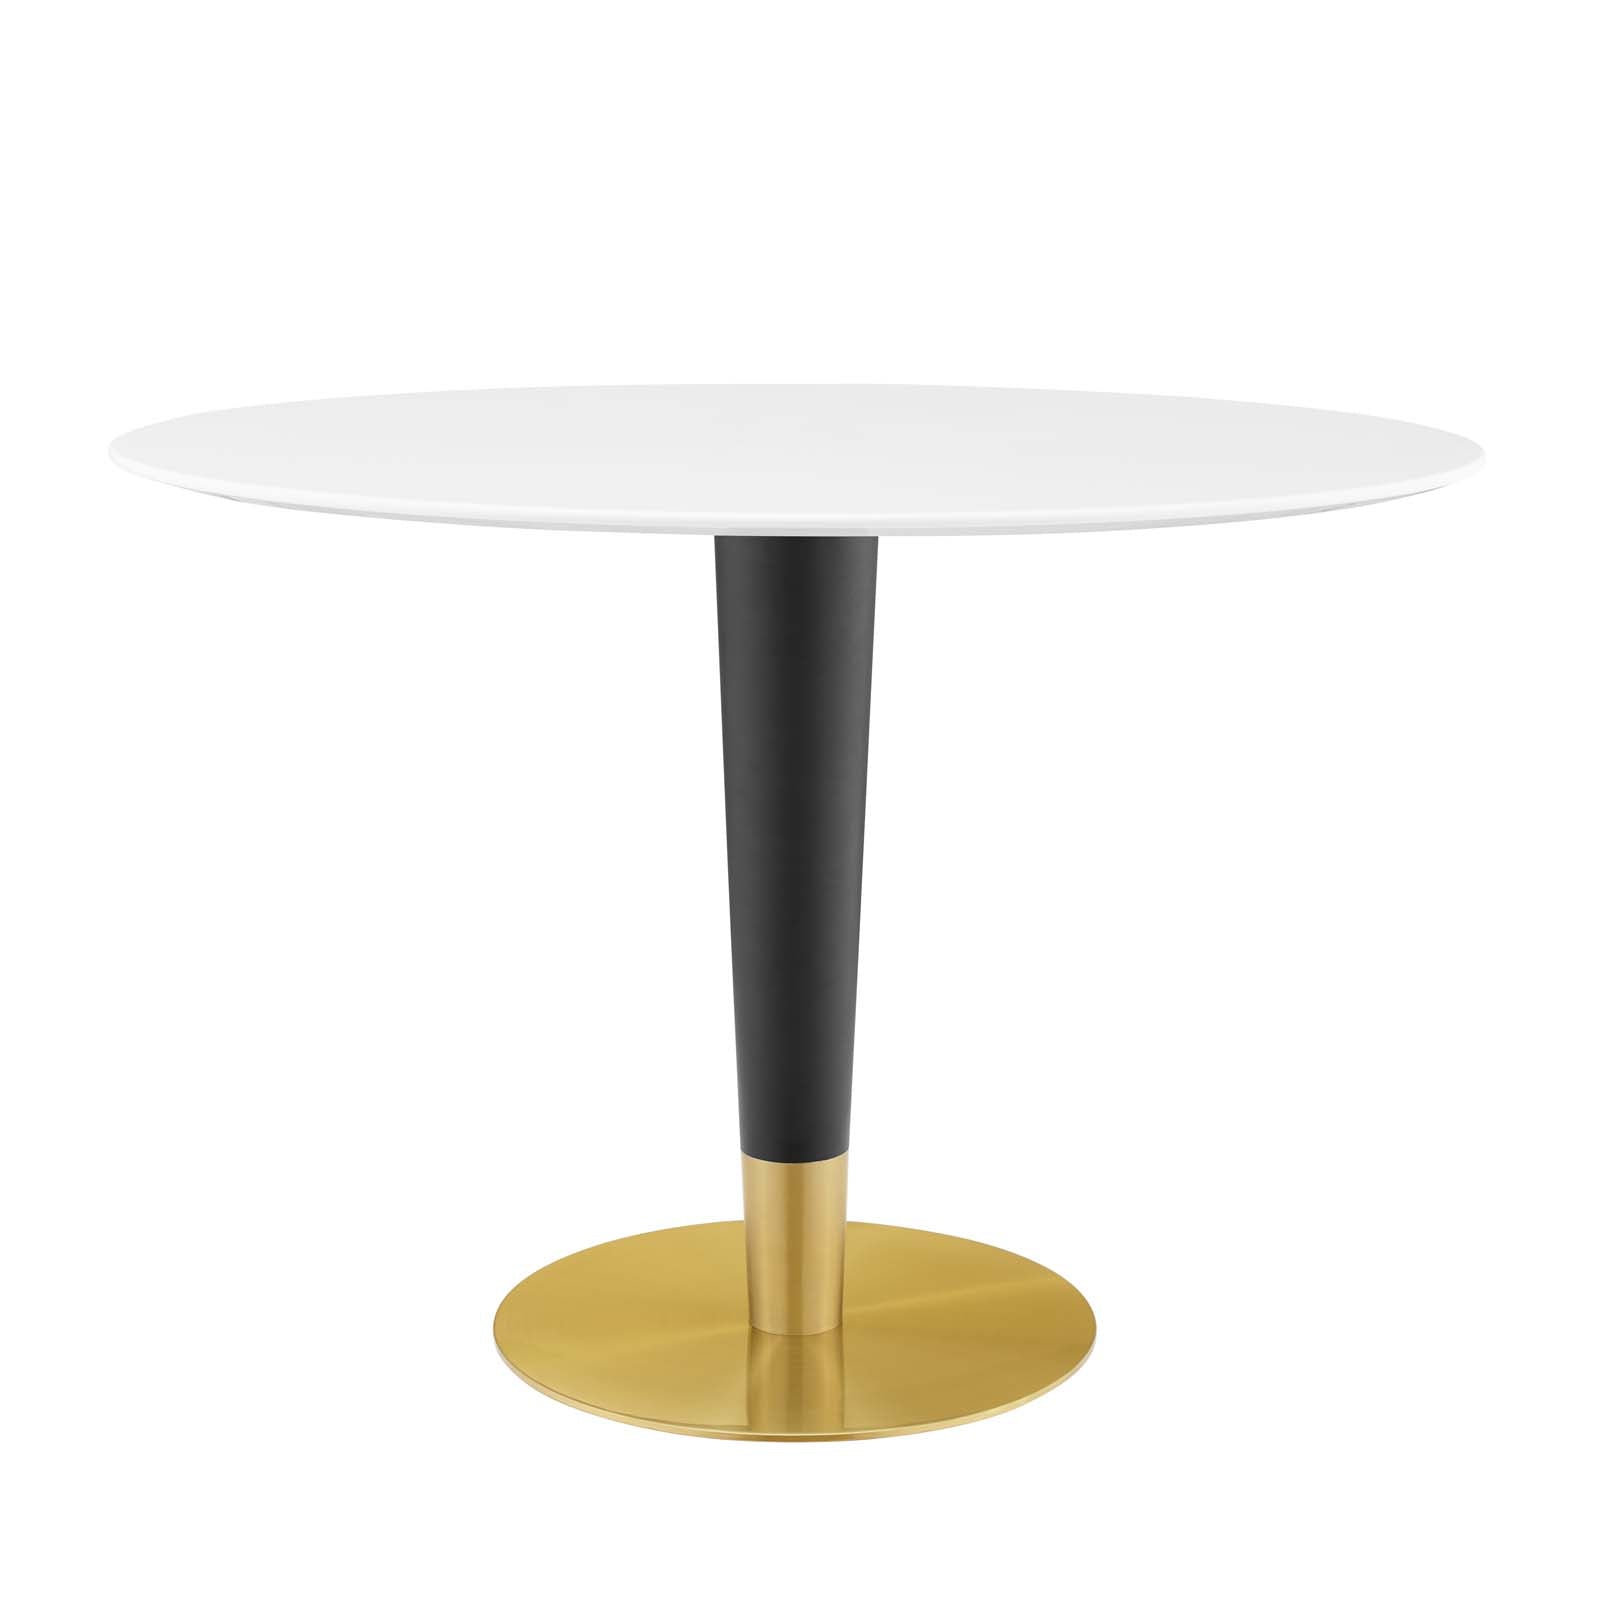 Zinque 42" Oval Dining Table - East Shore Modern Home Furnishings